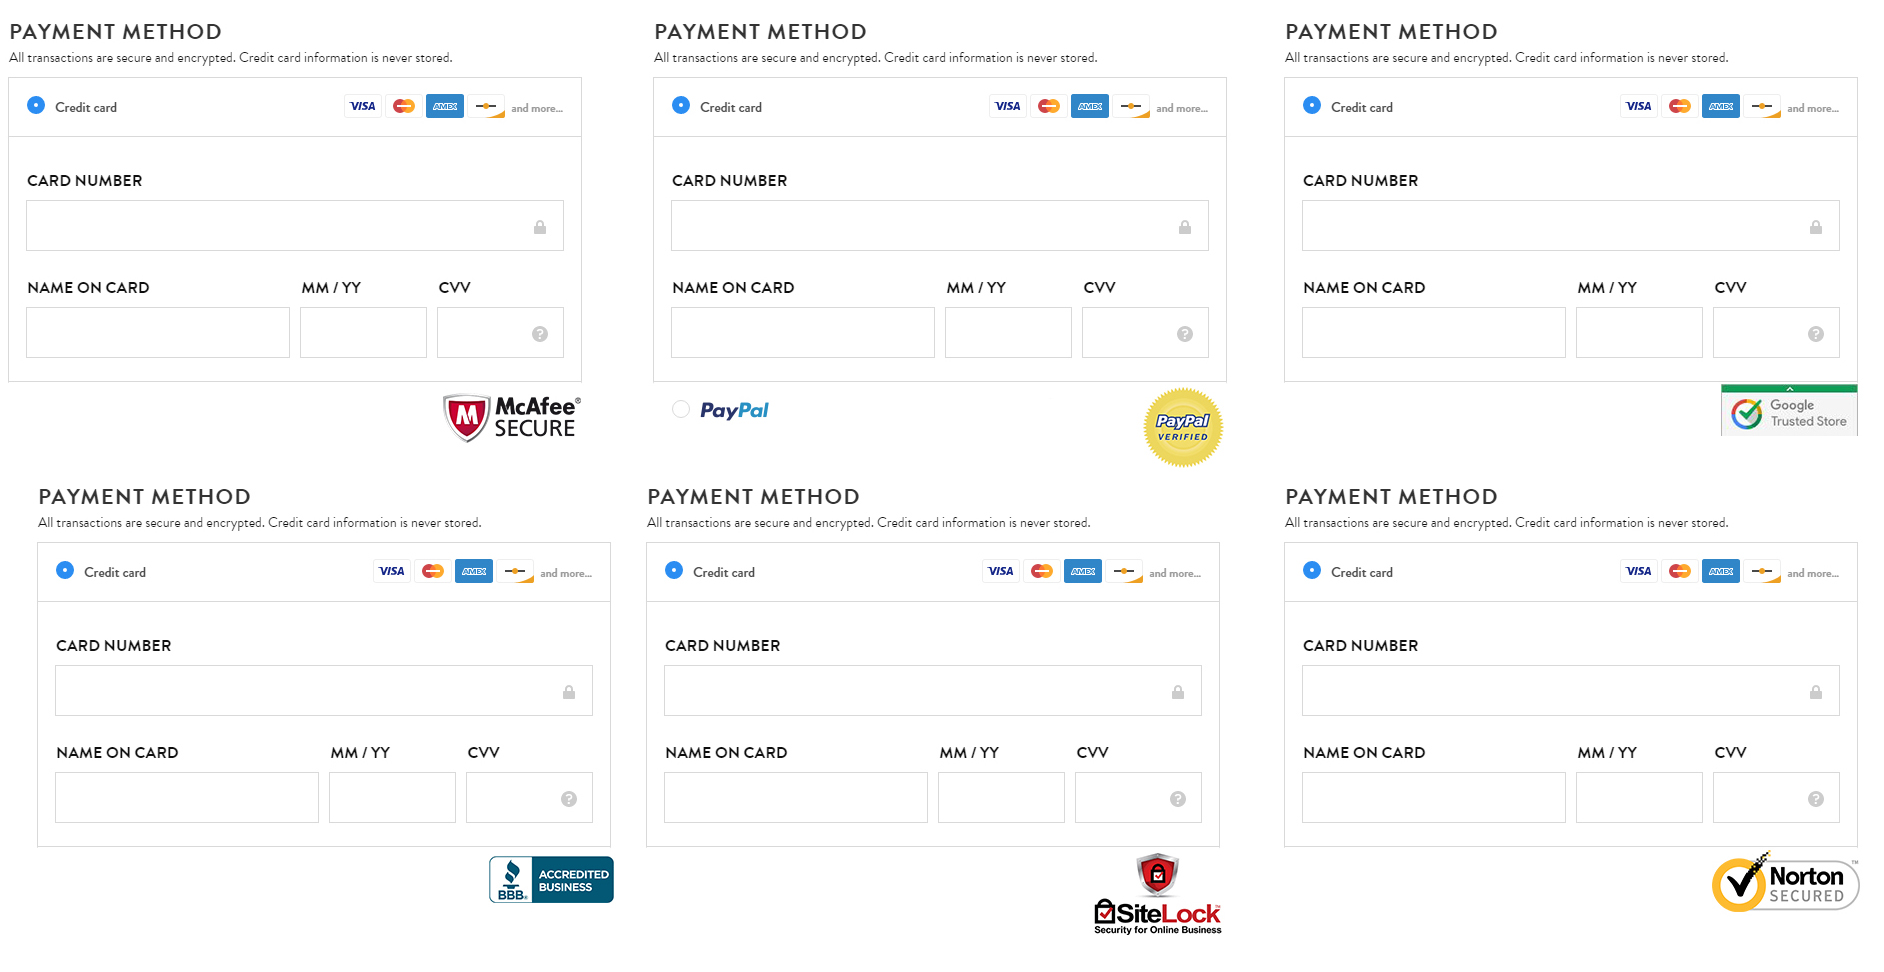 Treatment variations of the checkout page